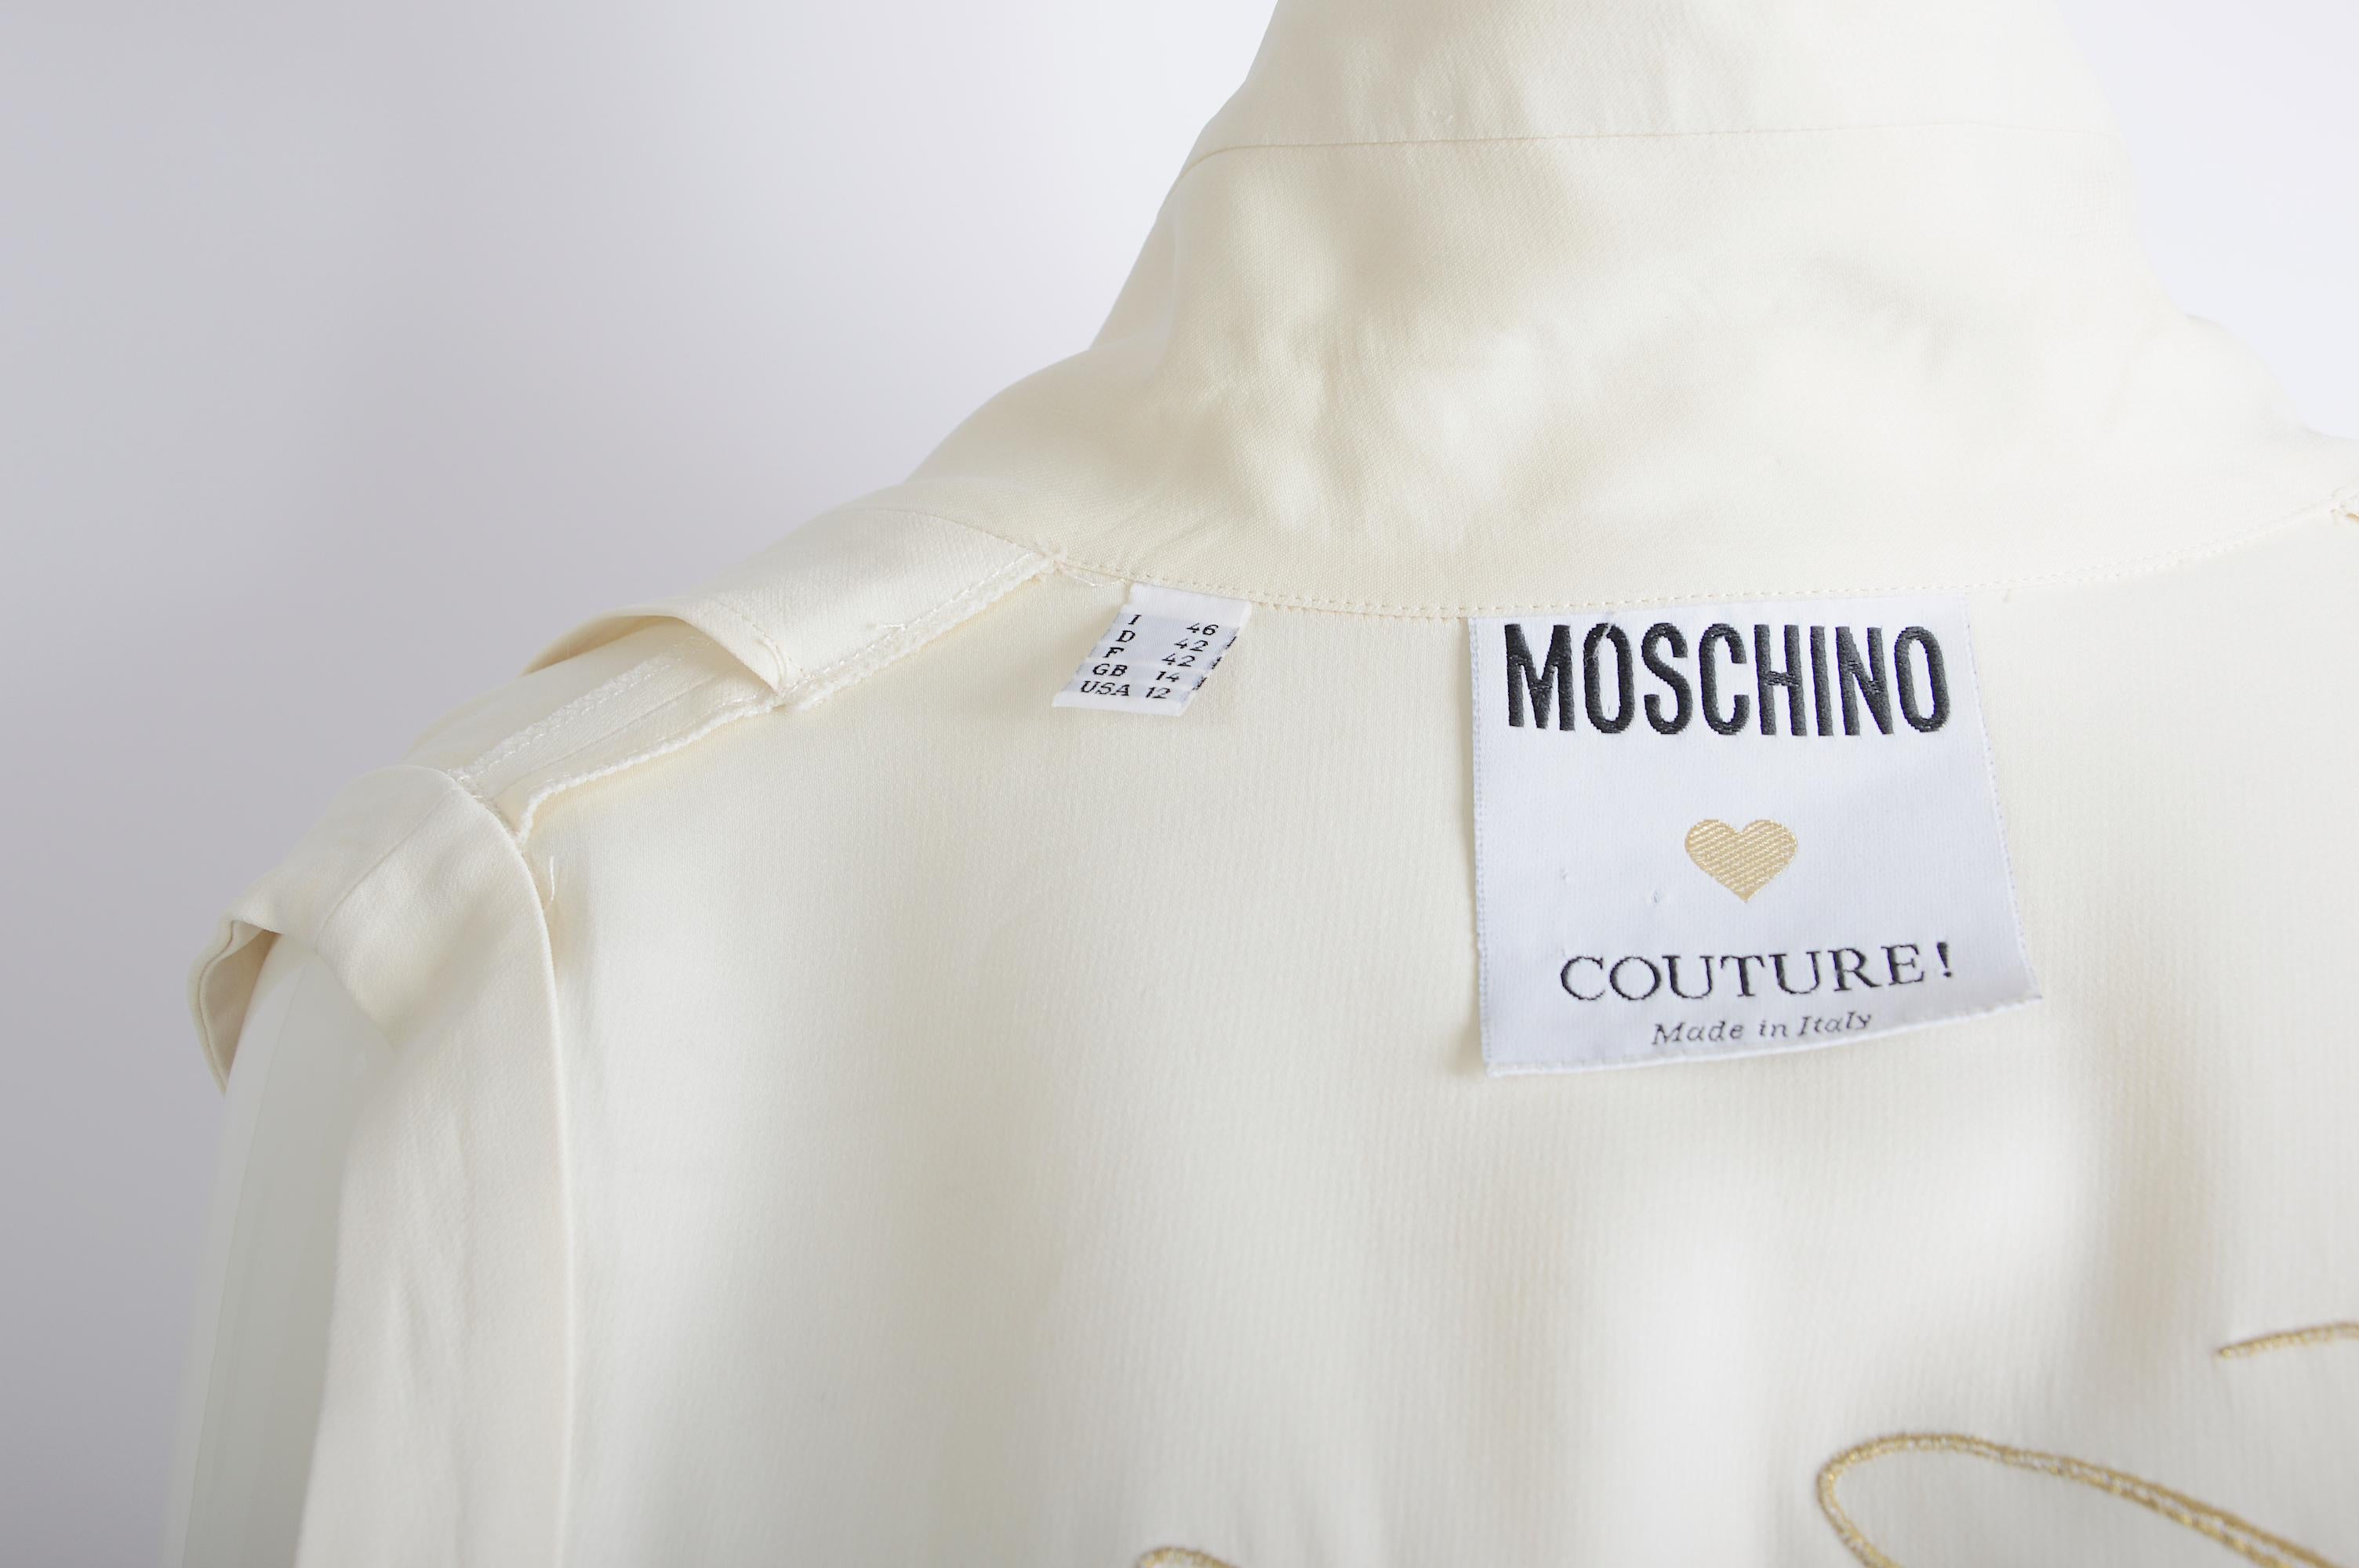  Moschino Couture collectors vintage embellished 